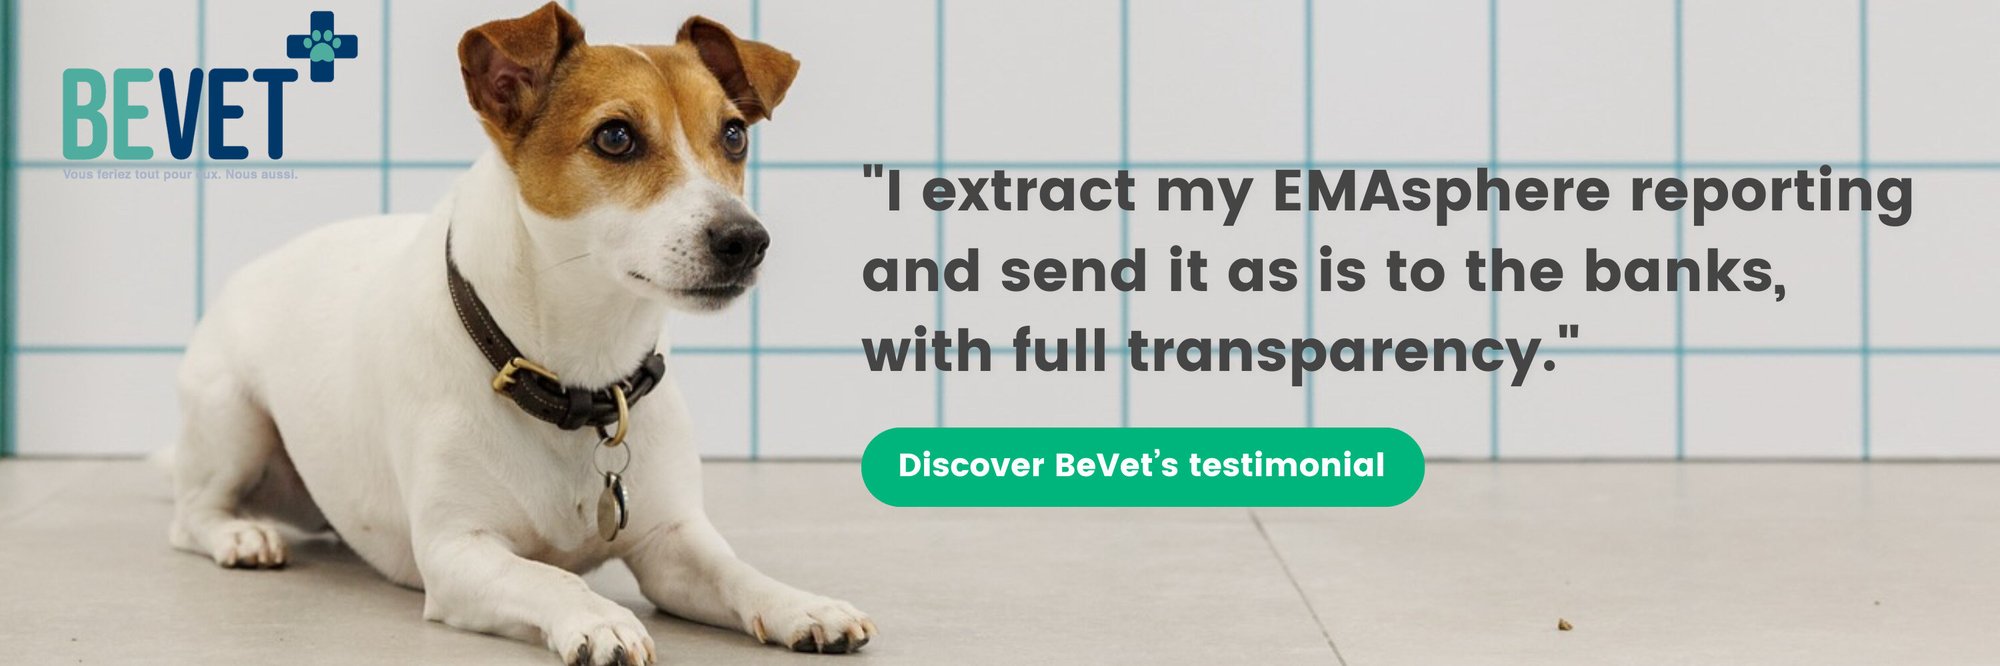 BeVet is a network of veterinary clinics and practices in Wallonia and Brussels. Here is the testimonial from Brieuc de Lamotte.